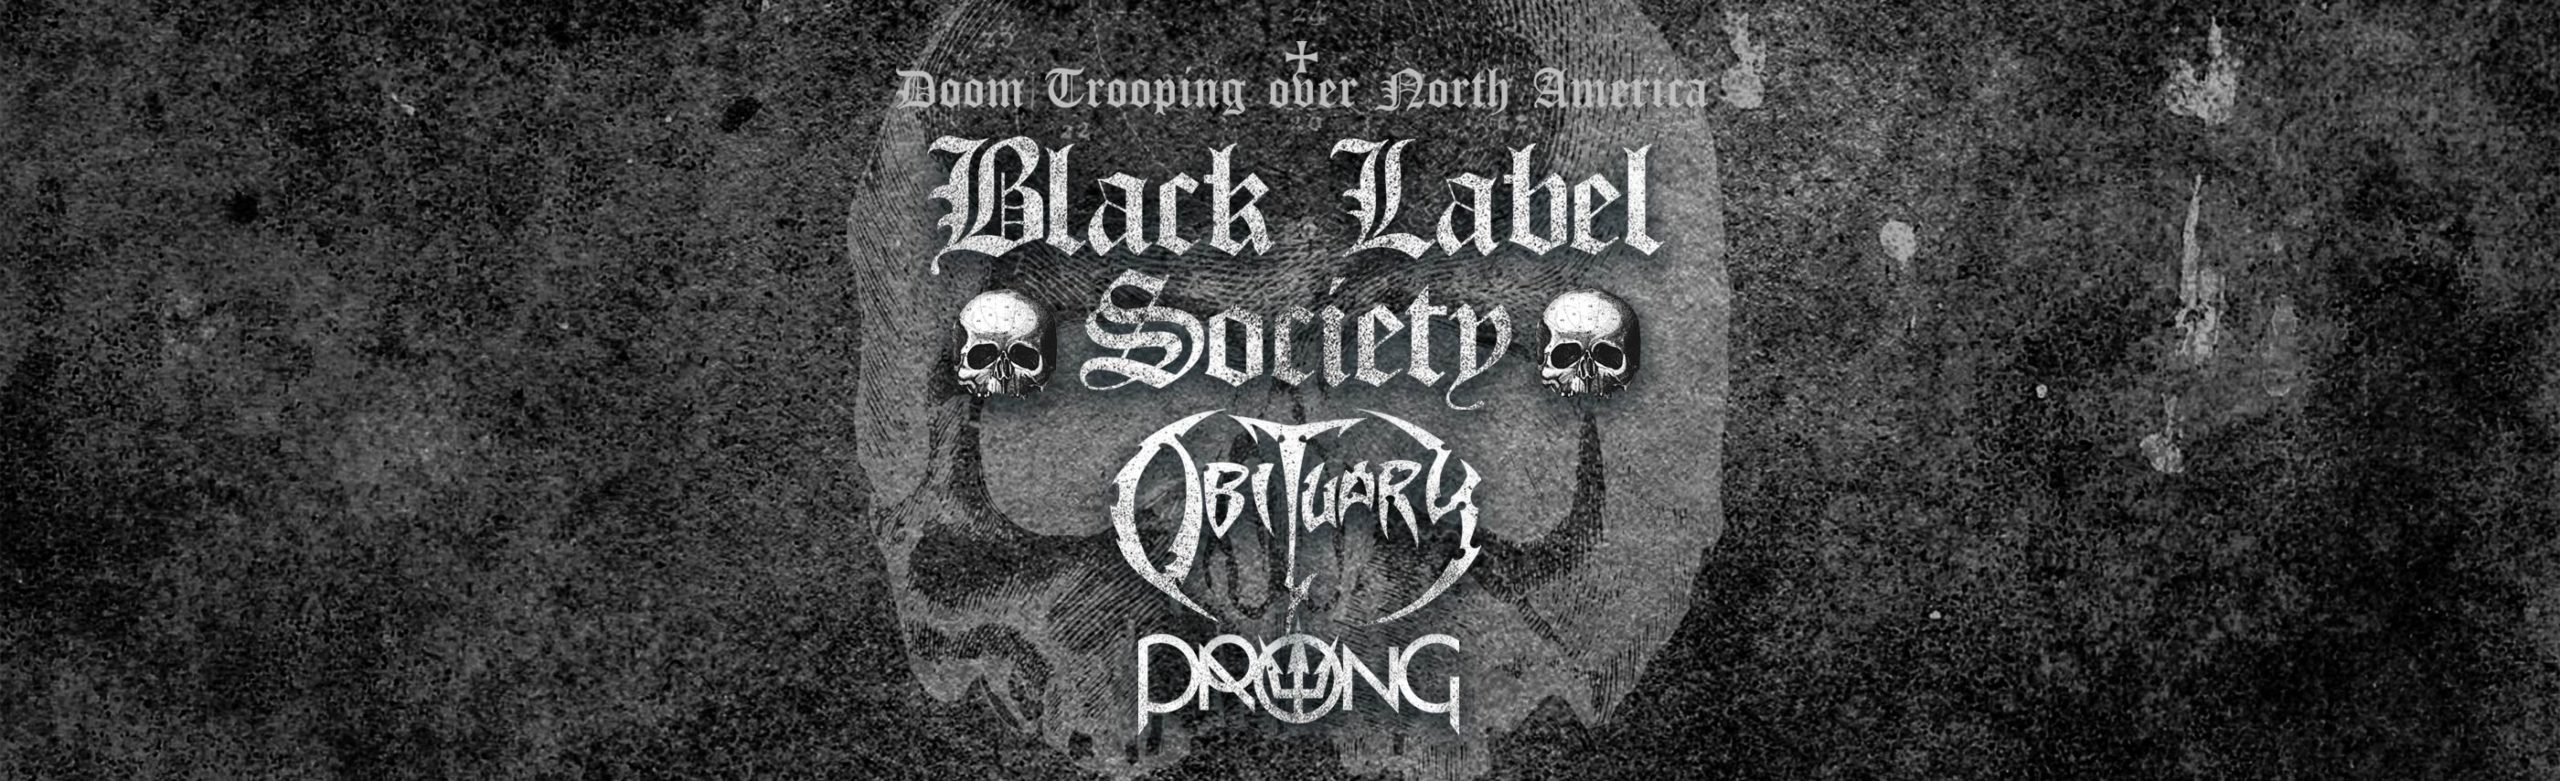 Event Info: Black Label Society at The Wilma 2021 Image